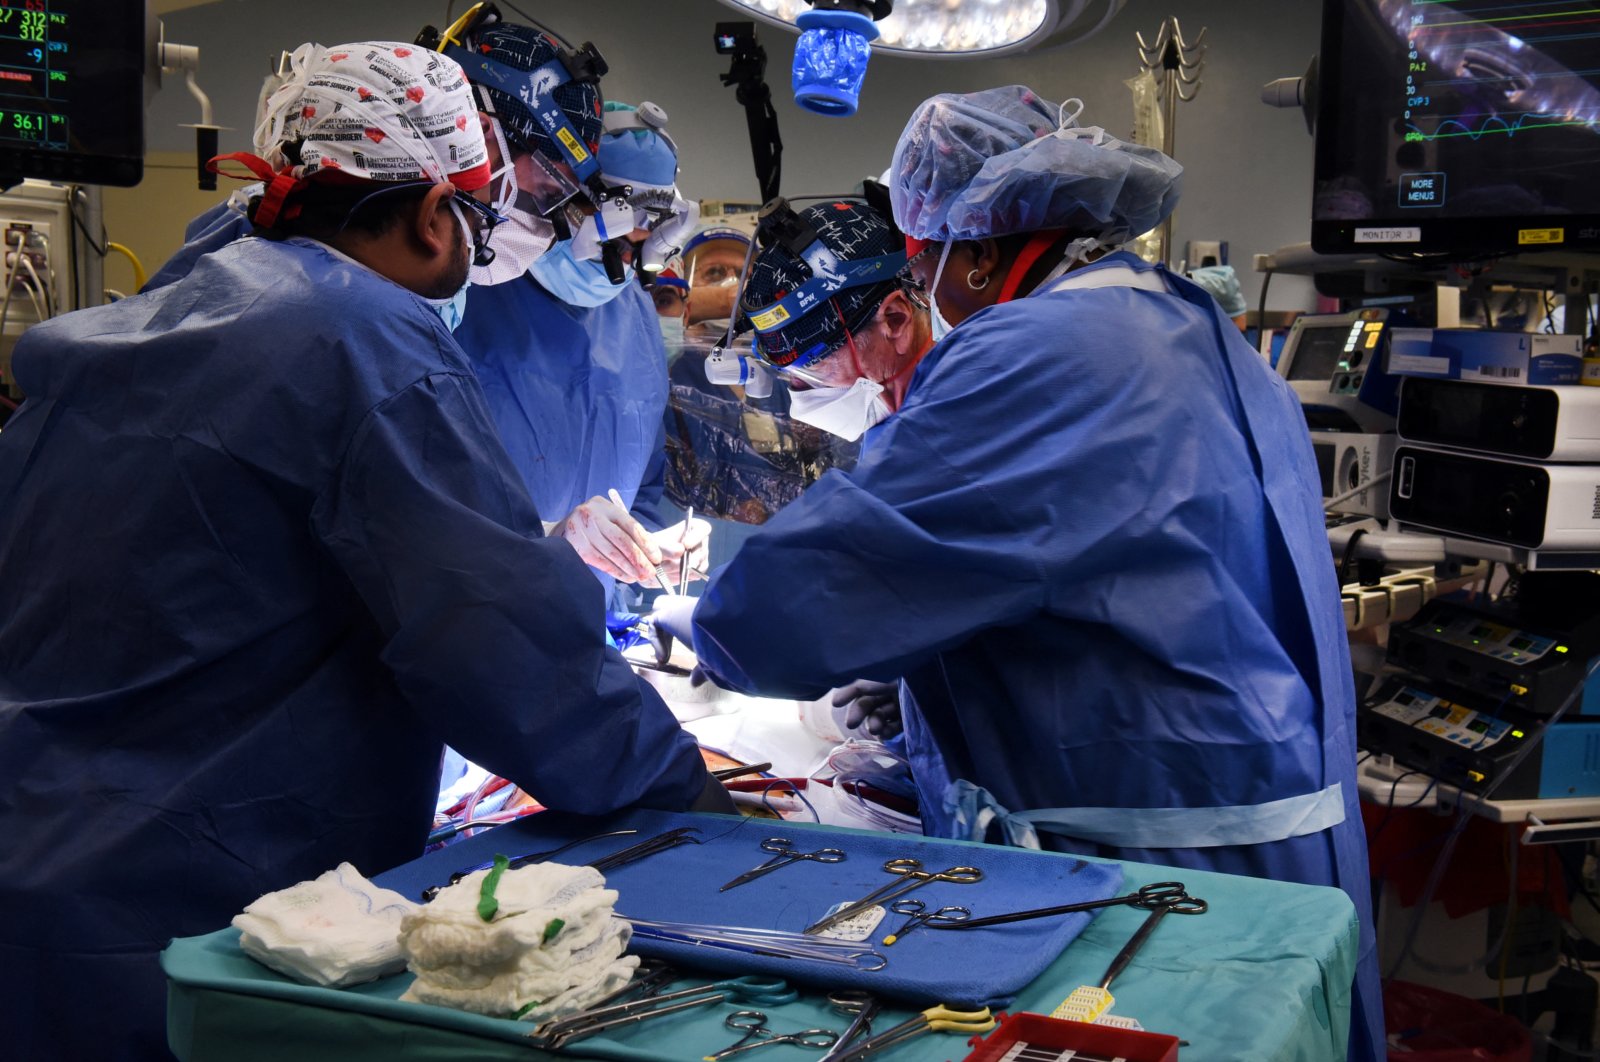 Surgeon Bartley P. Griffith, MD leads a team conducting a successful transplant of a genetically-modified pig heart on David Bennett, at University of Maryland Medical Center in Baltimore, Maryland, U.S., Jan. 7, 2022. (UMSOM via Reuters)